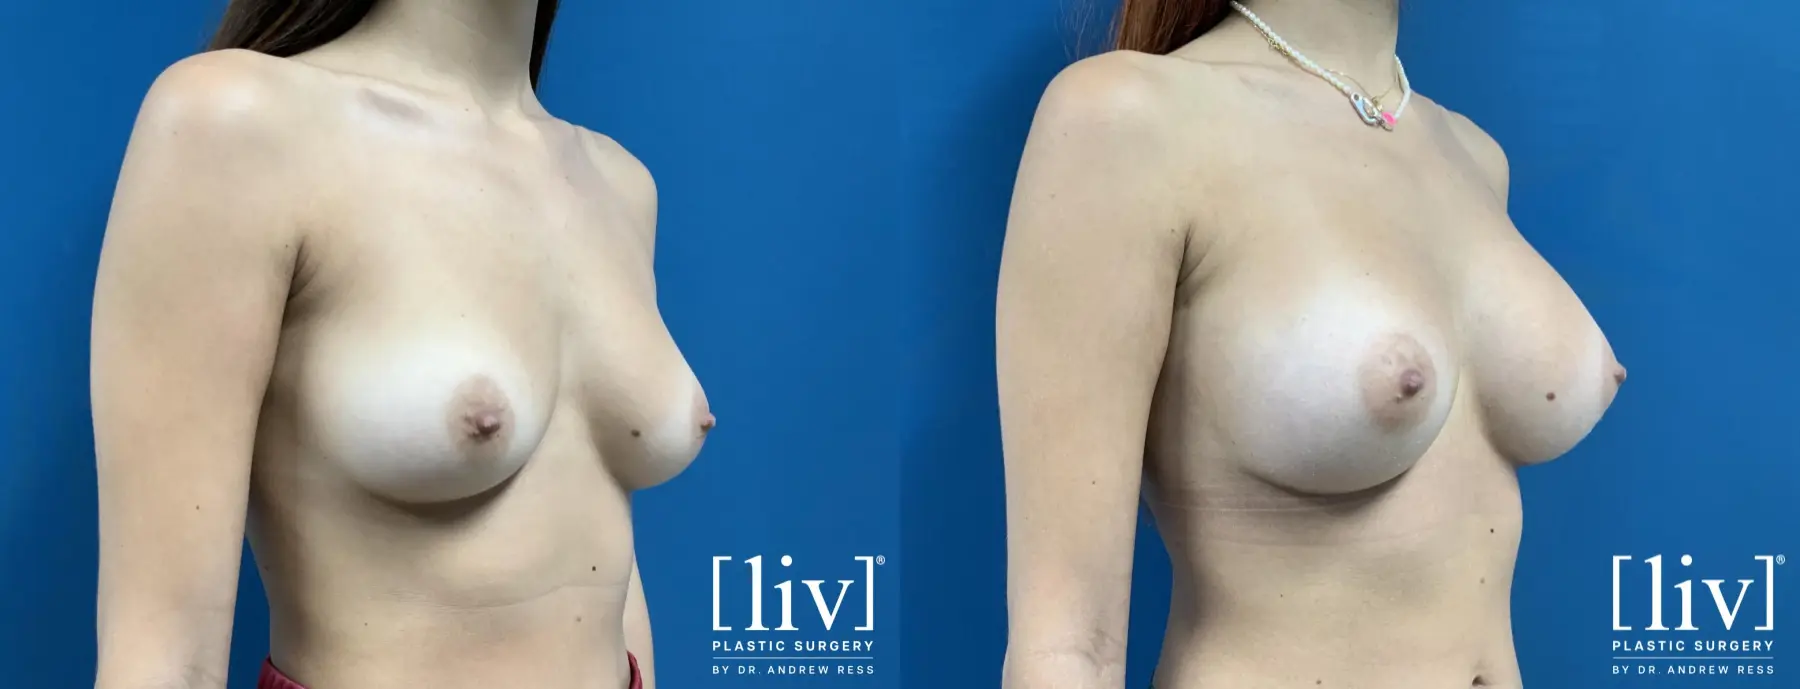 Breast Augmentation: Patient 2 - Before and After 4